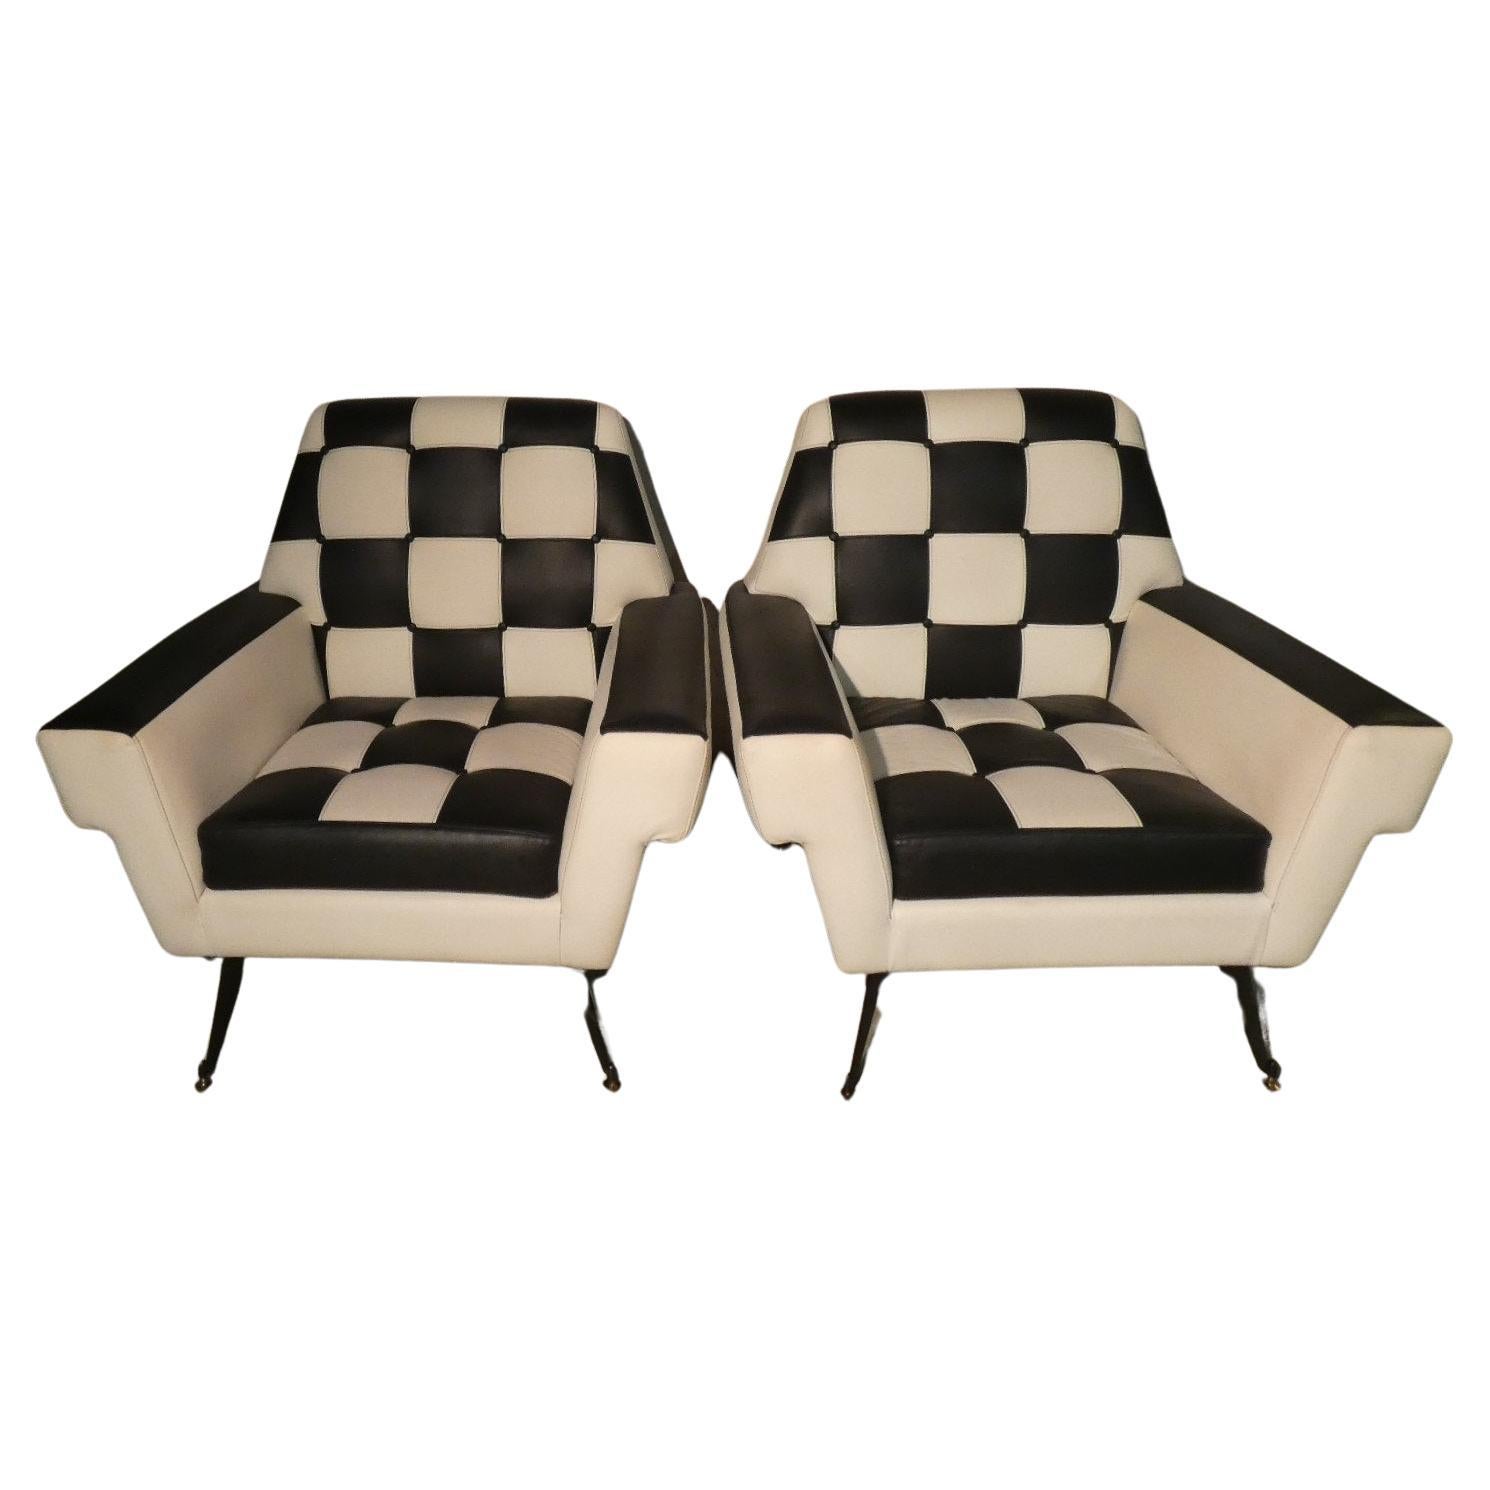 Set of 2 Abstraction Design Armchairs, 1960s For Sale